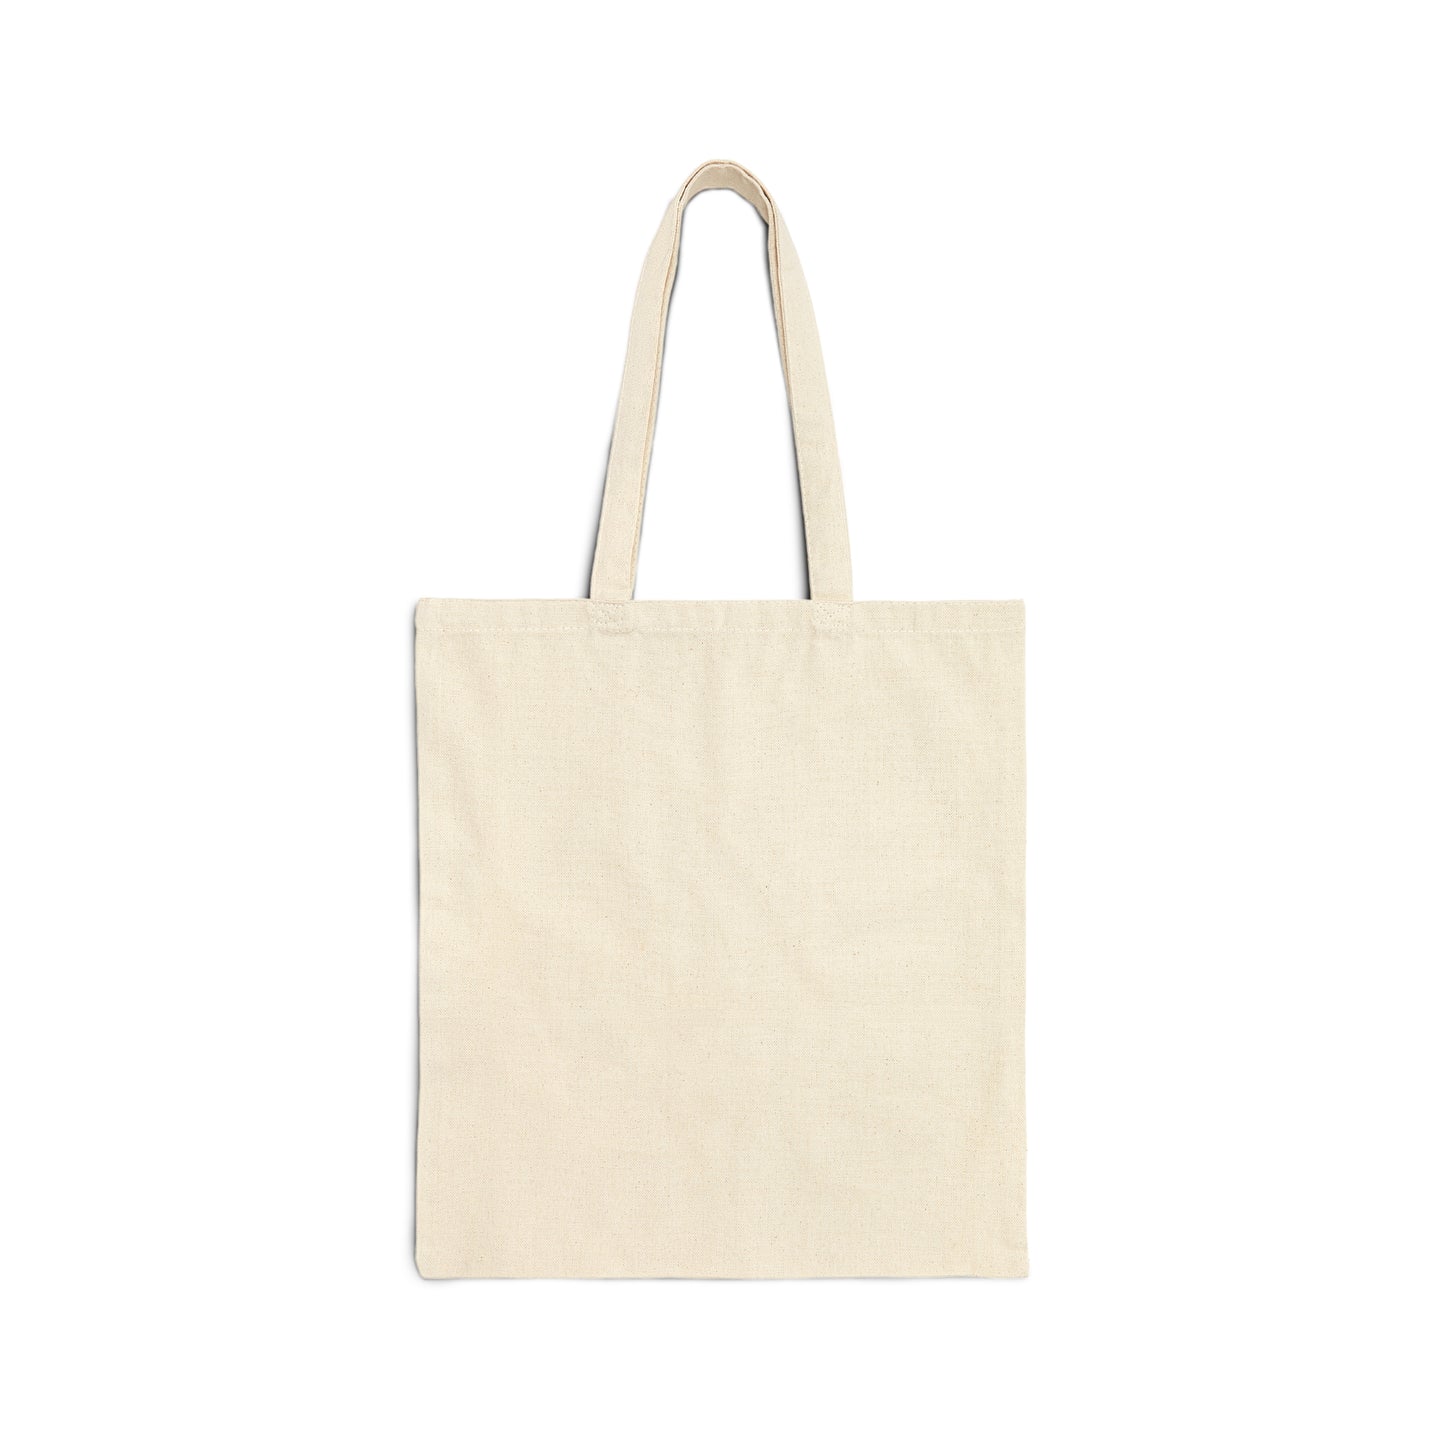 It's A Perfect Day For Occupational Therapy Tote Bag, OT Tote Bag